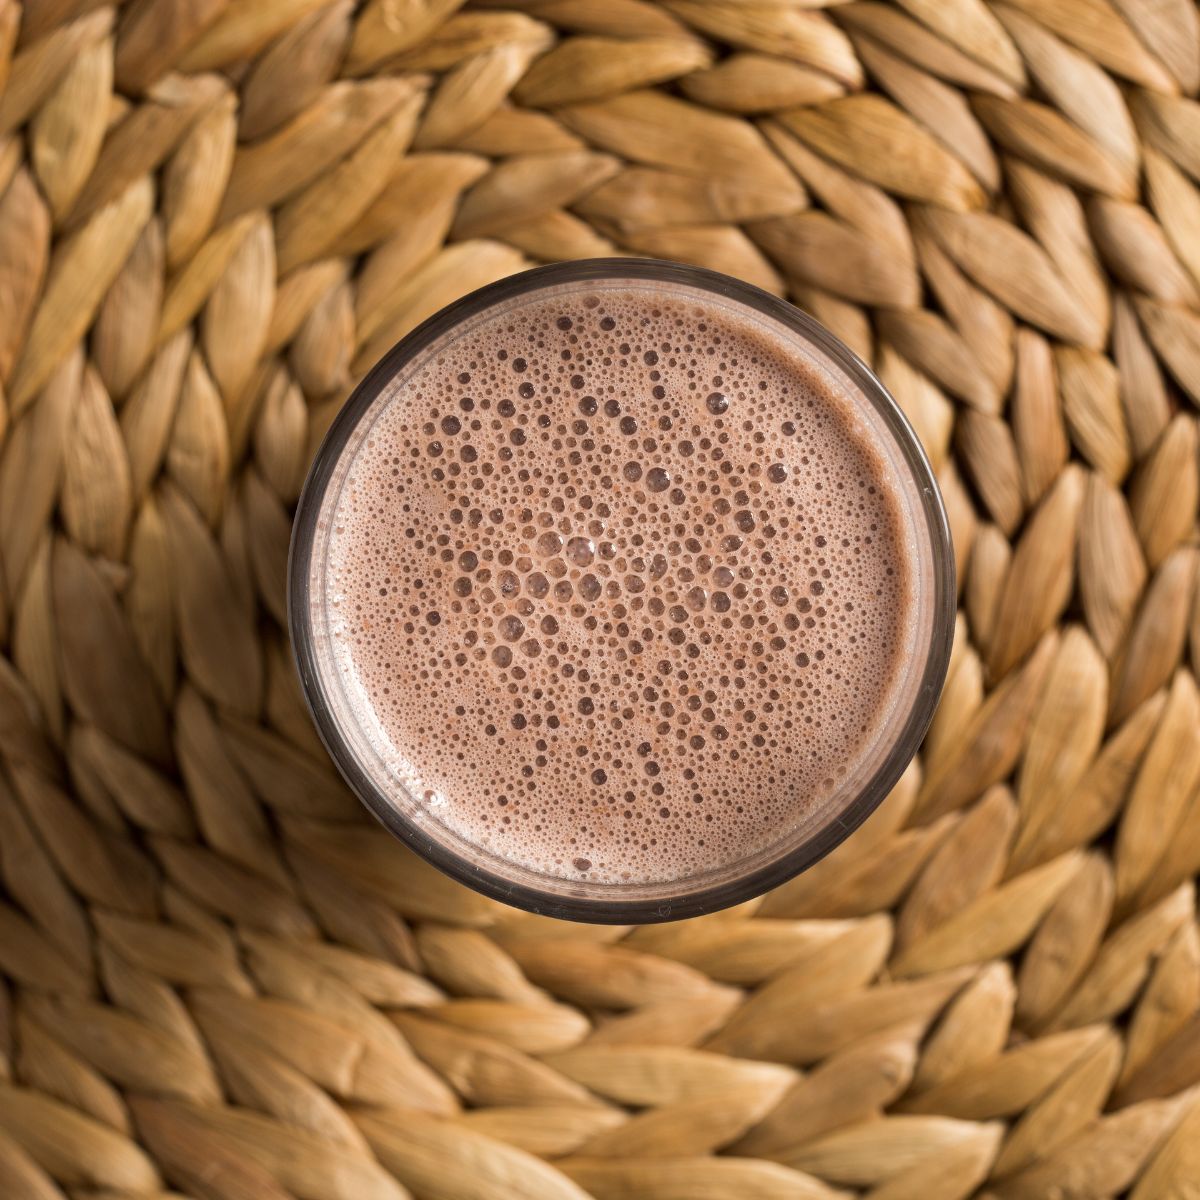 Chocolate weight gain smoothie in a glass